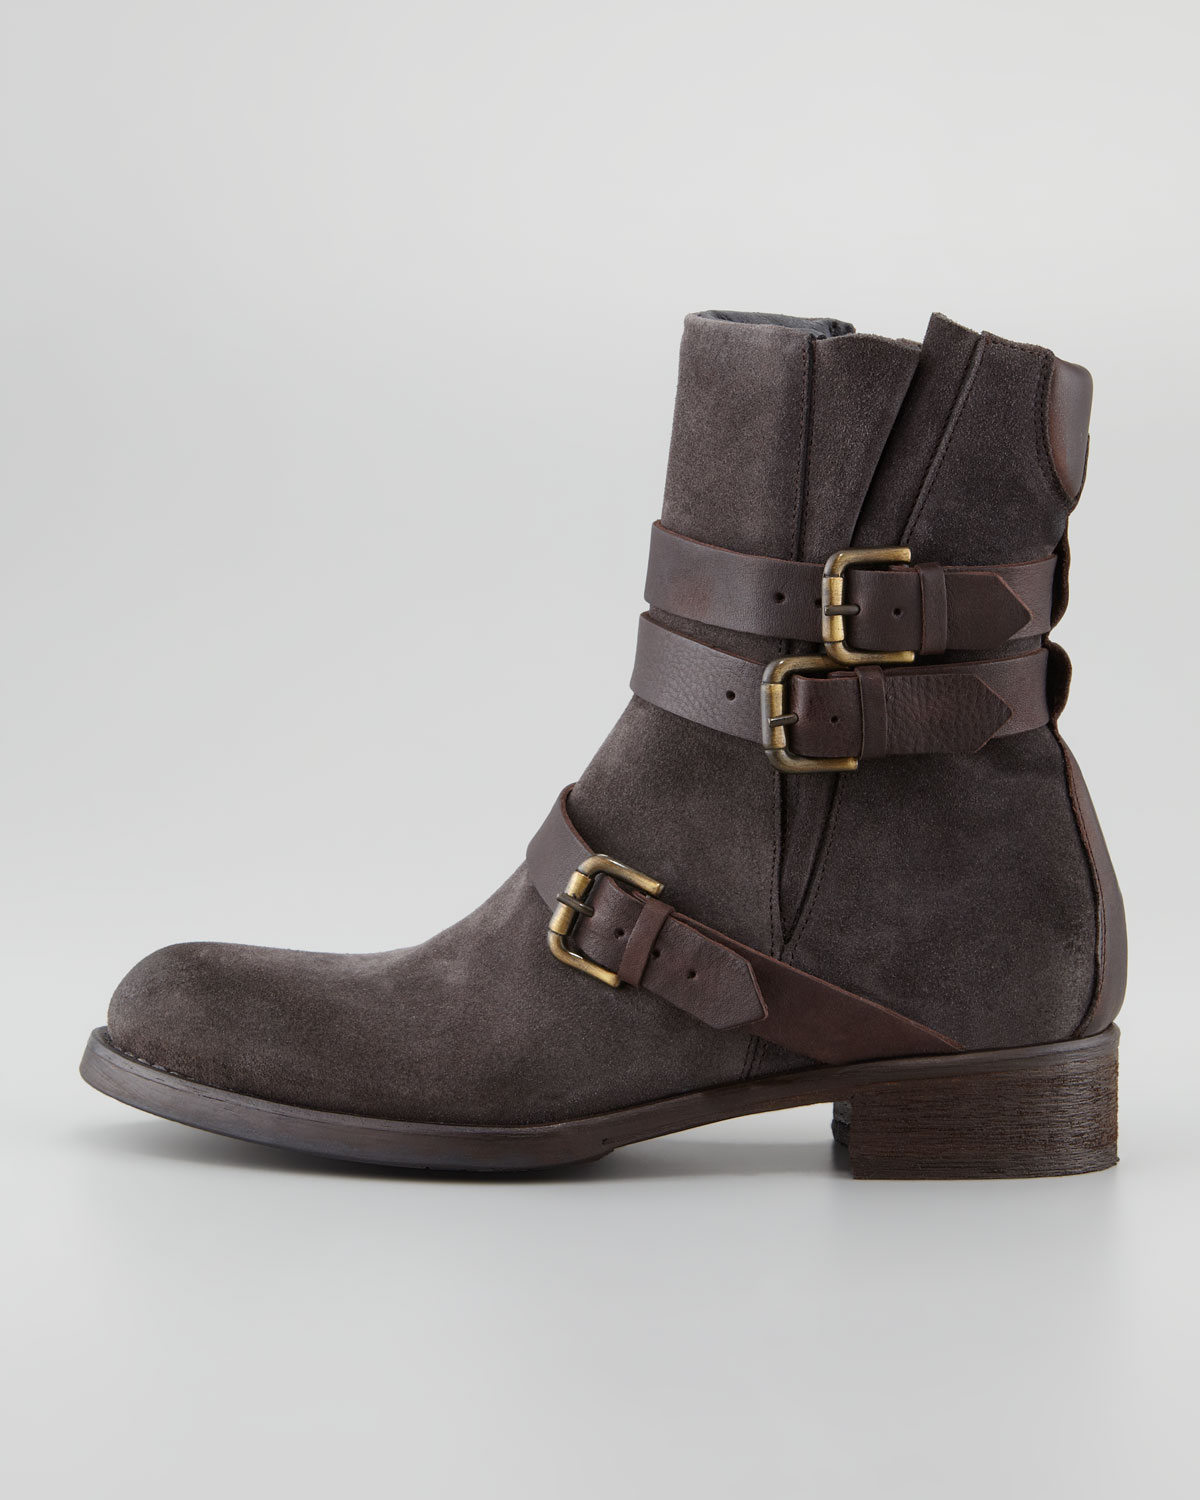 Lyst - Alberto fermani Suede Buckled Ankle Boot Anthracite in Gray